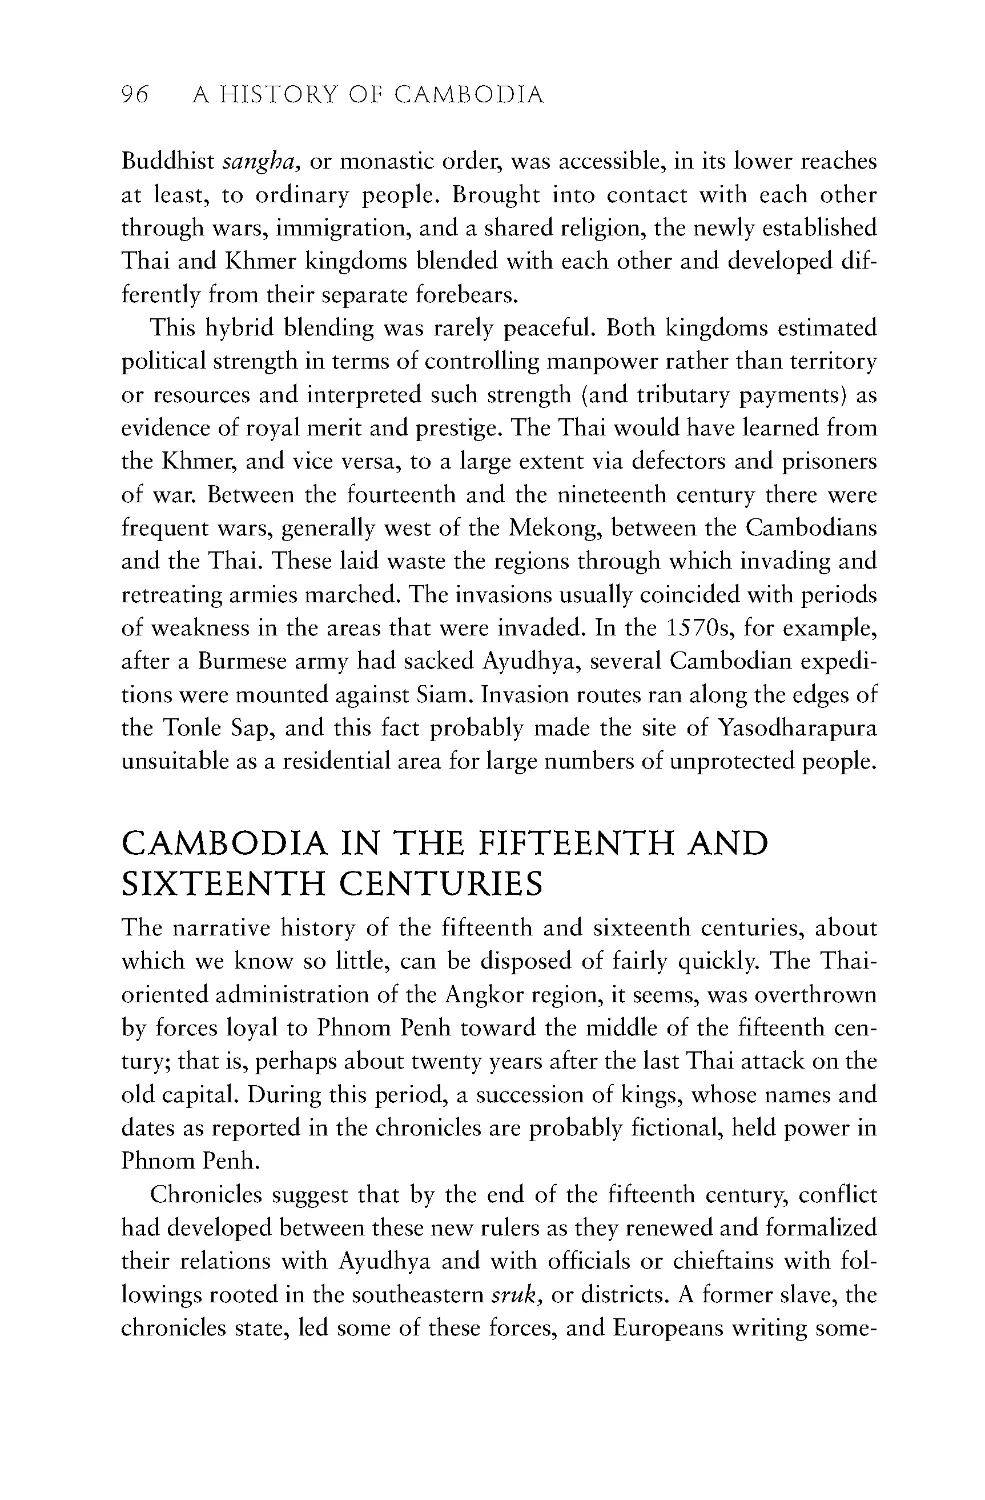 Cambodia in the Fifteenth and Sixteenth Centuries